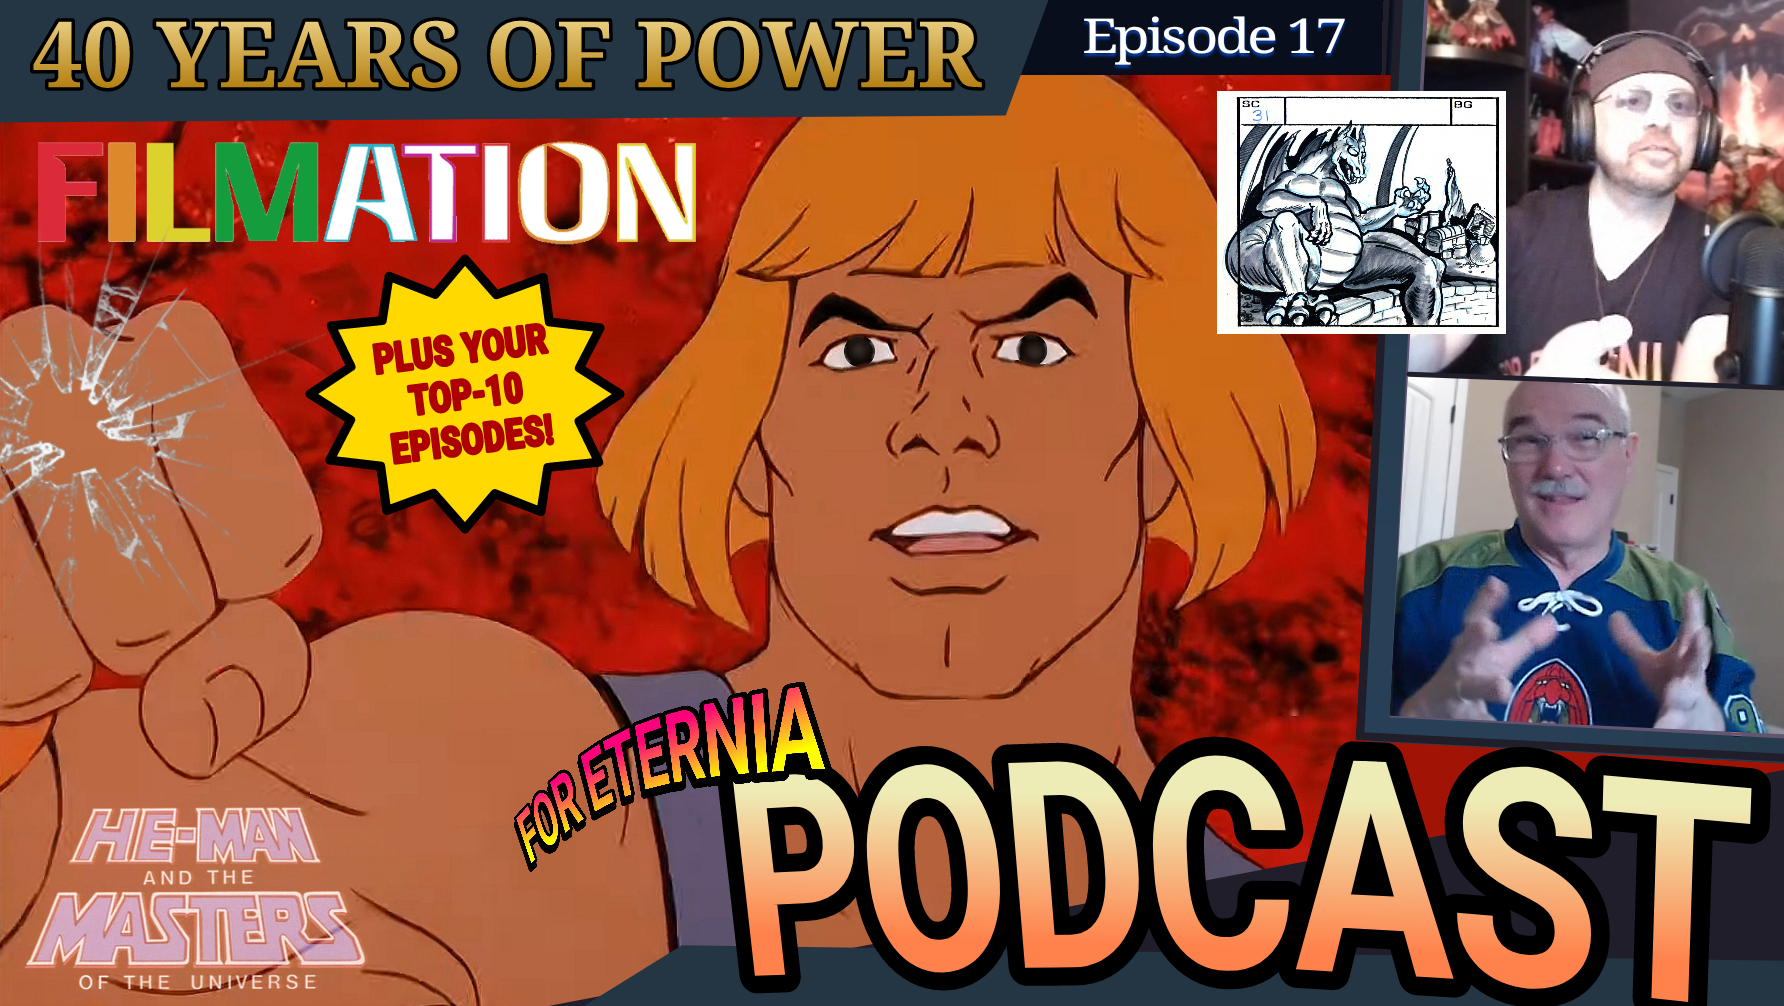 40 YEARS OF POWER! Celebrating ”He-Man and the Masters of the Universe” with Filmation’s Robert Lamb